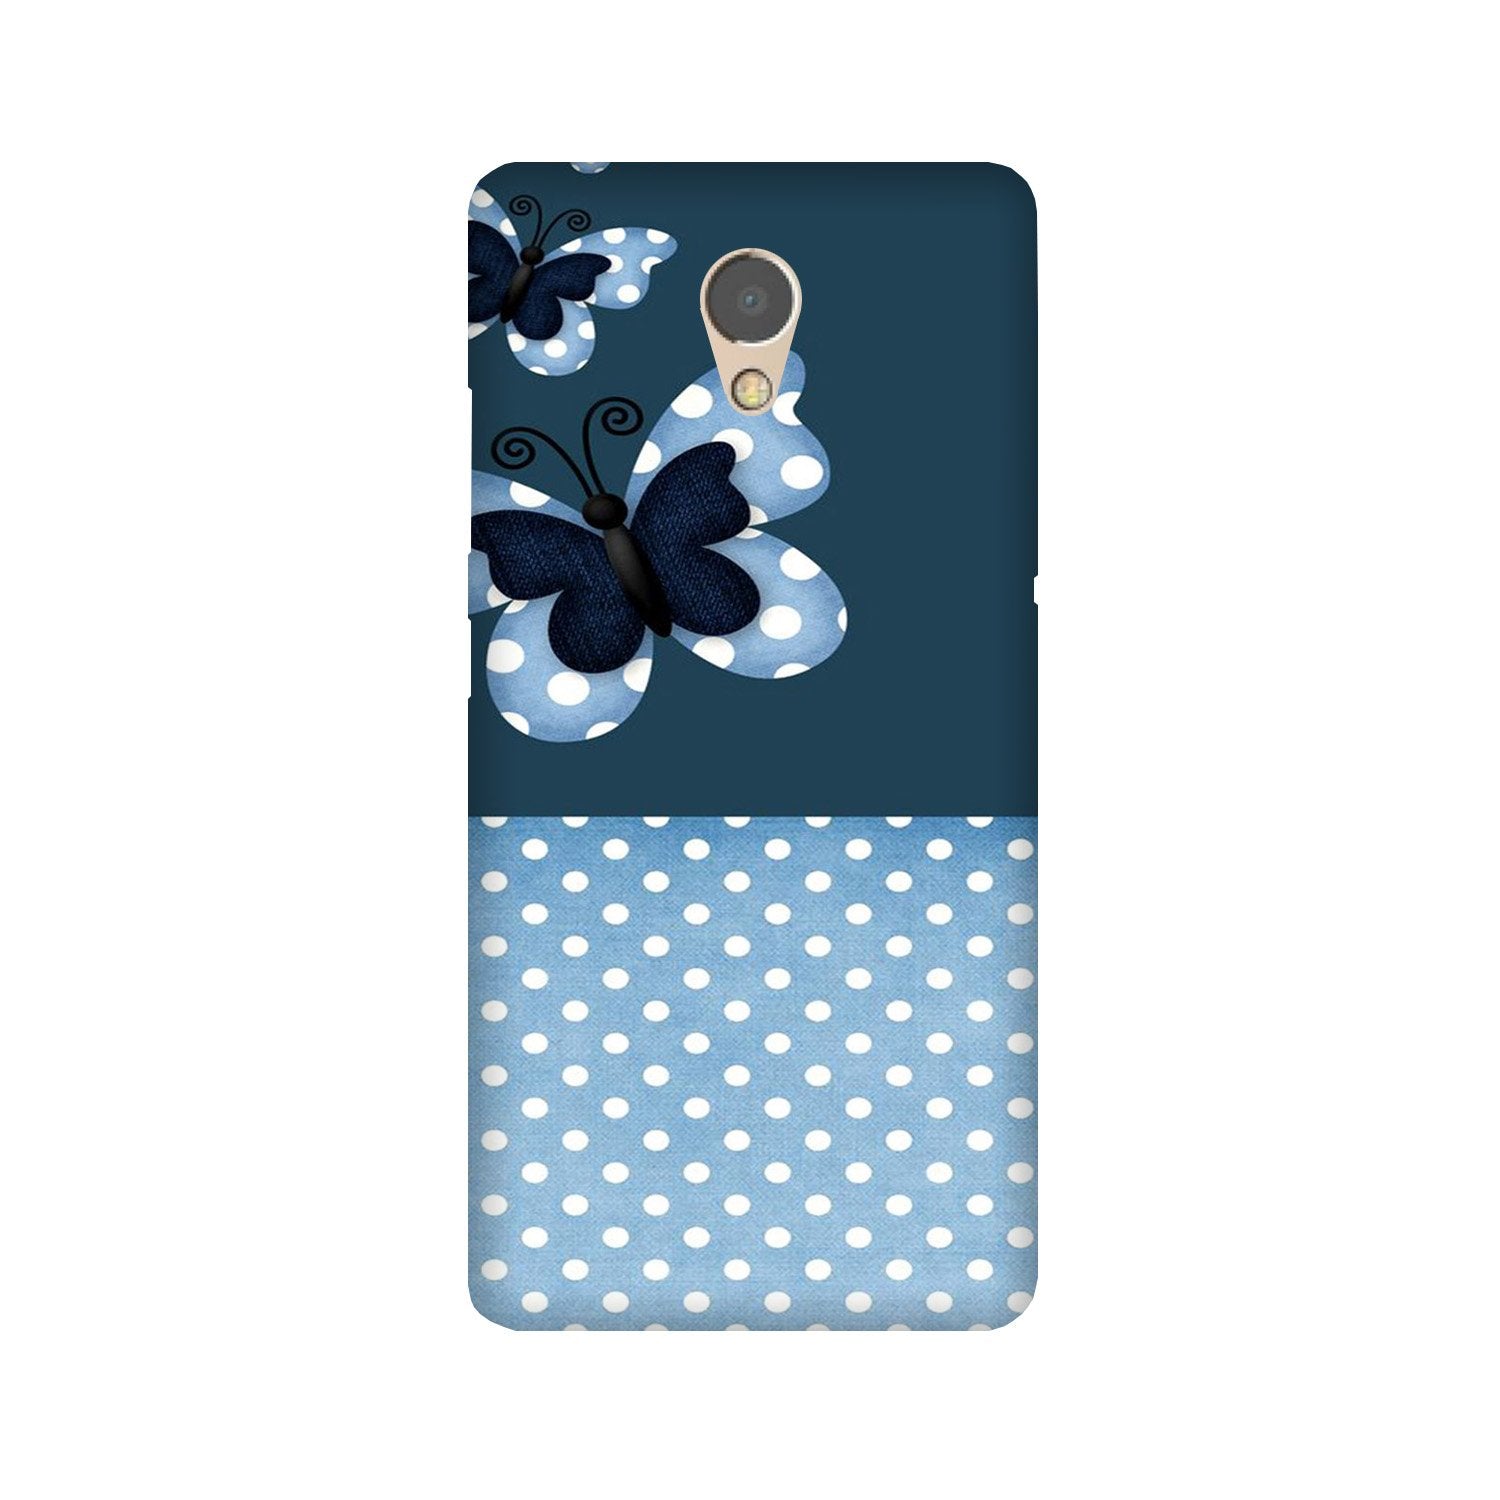 White dots Butterfly Case for Lenovo P2